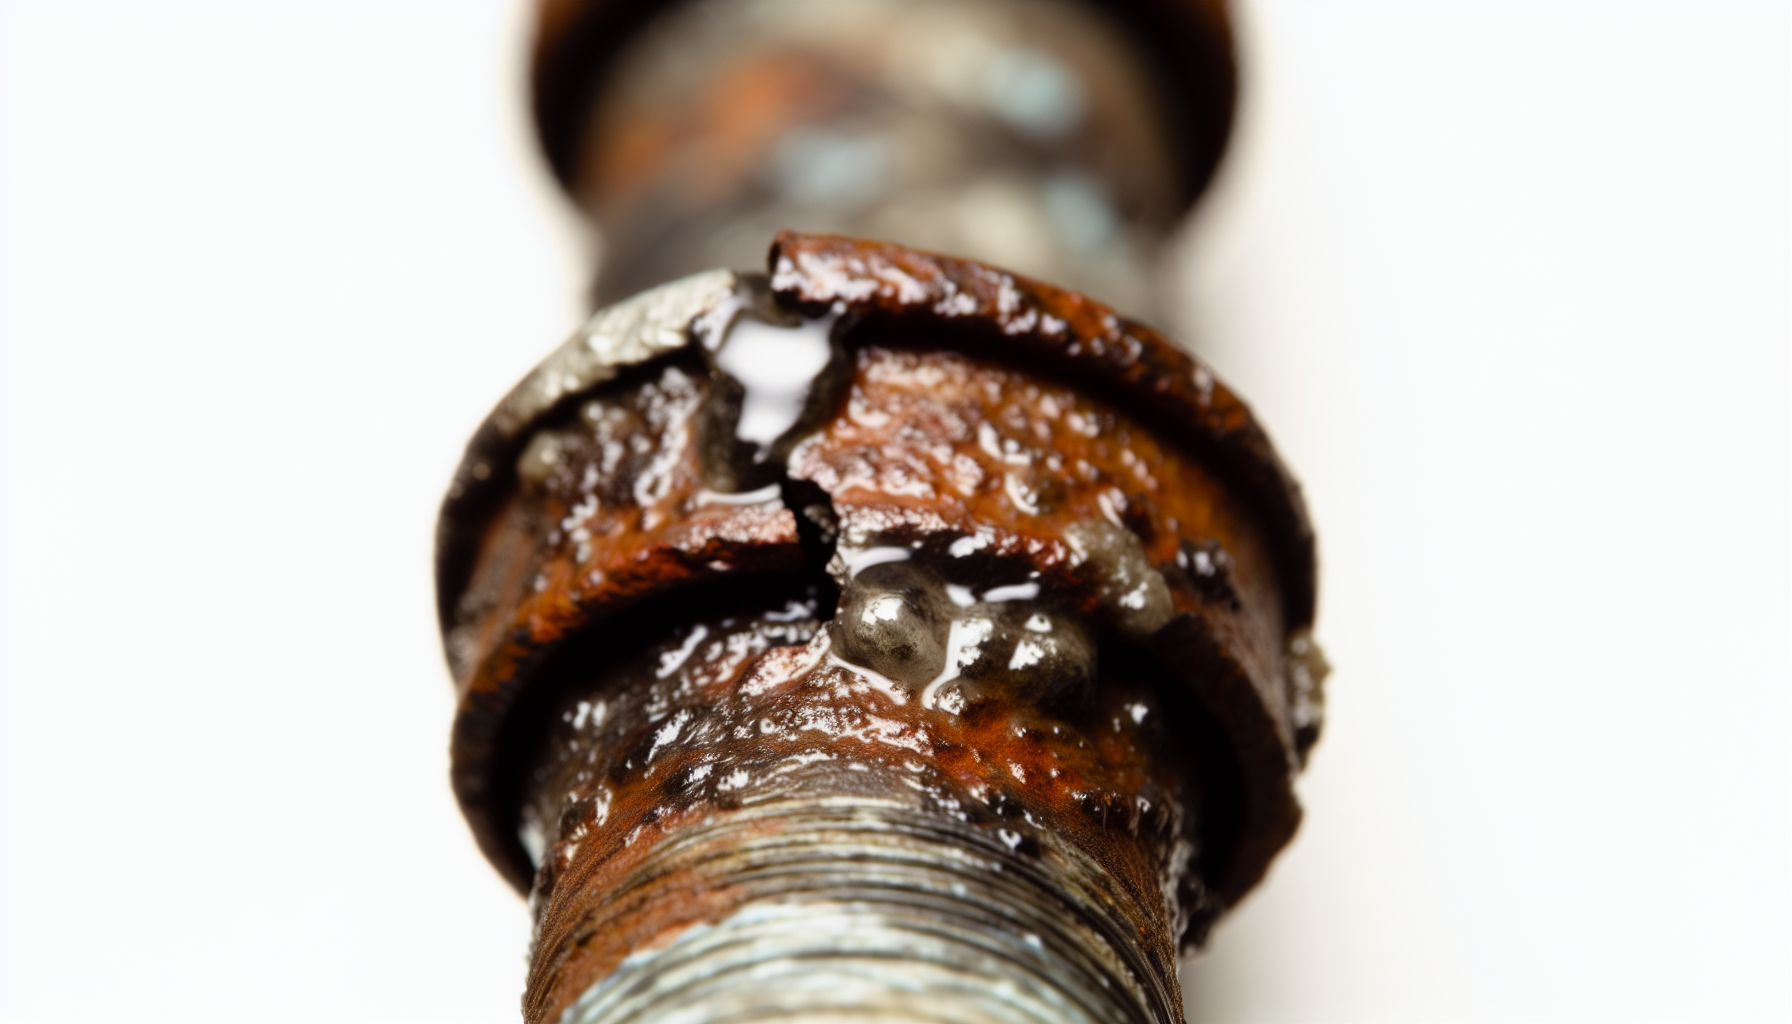 Close-up of pipe joint with visible rust and mineral deposits